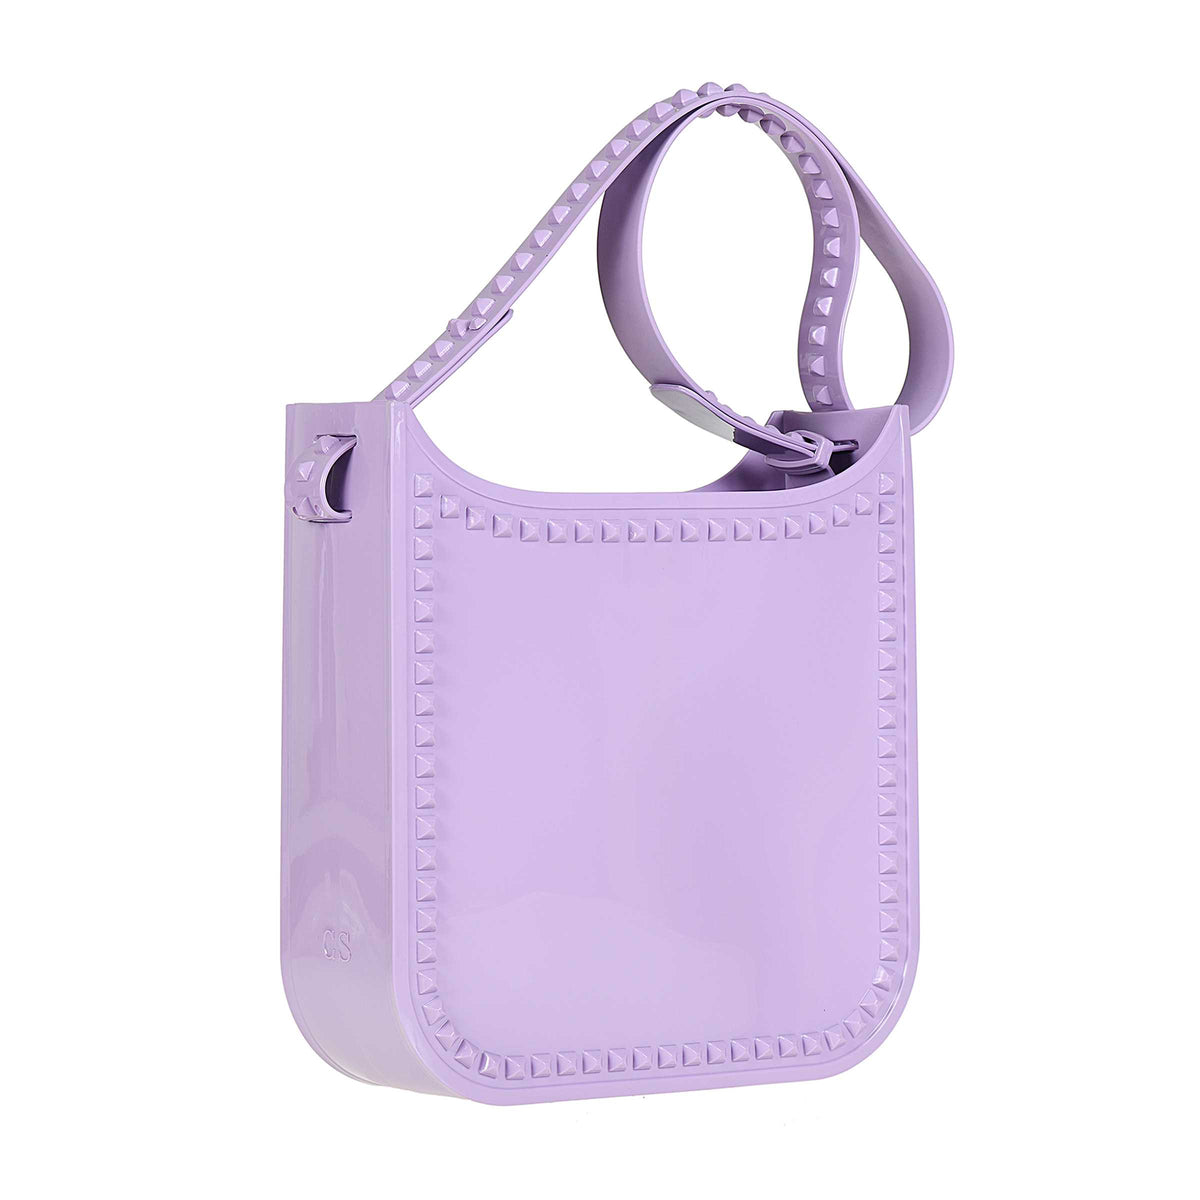 beach bags for women in violet from Carmen Sol